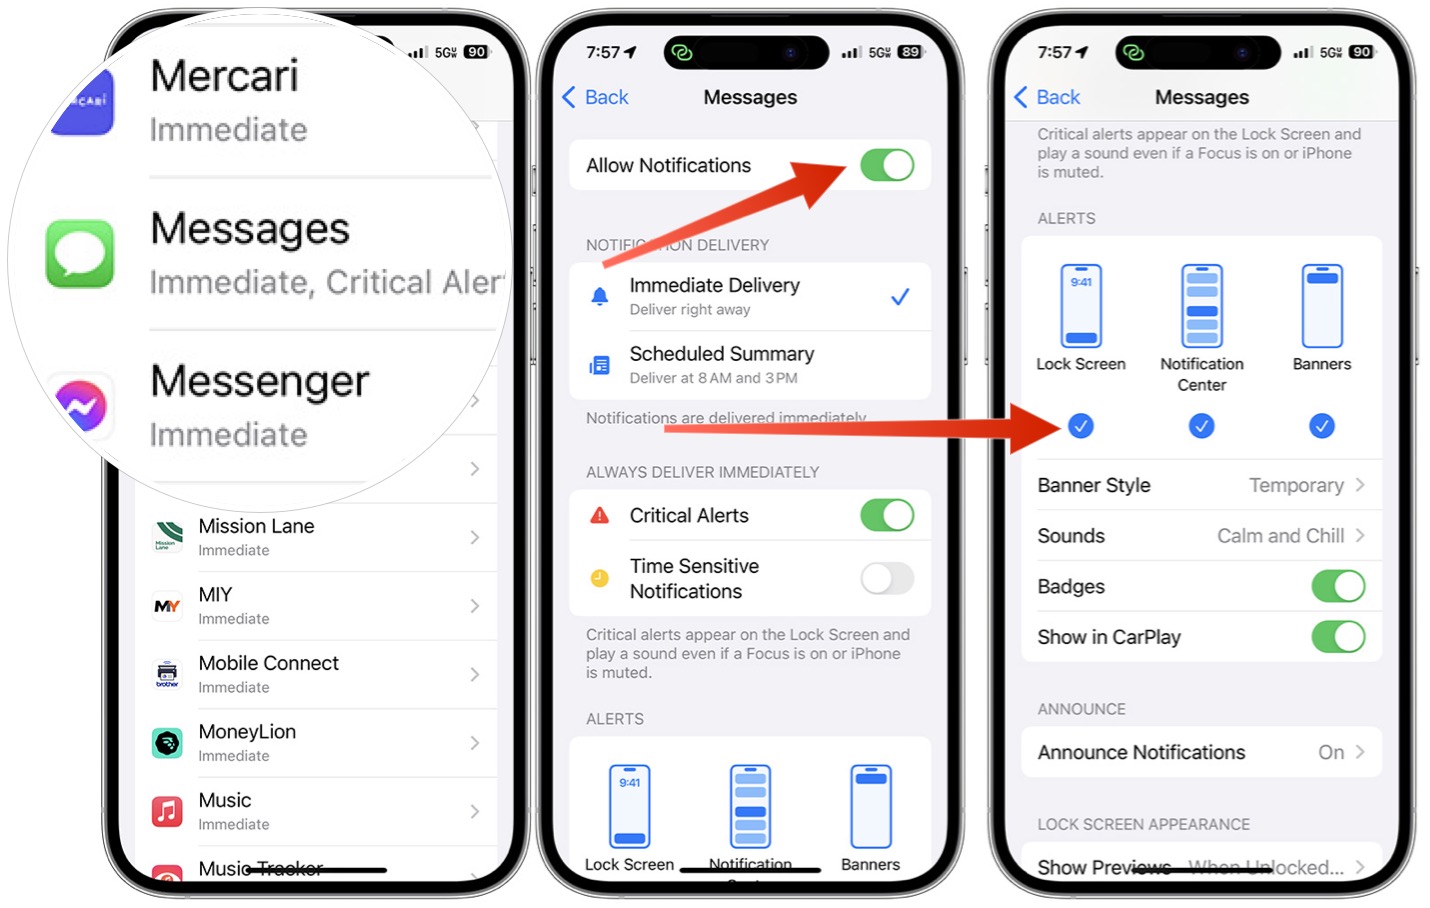 Screenshots showing how to check the notification settings for Messages on iPhone.